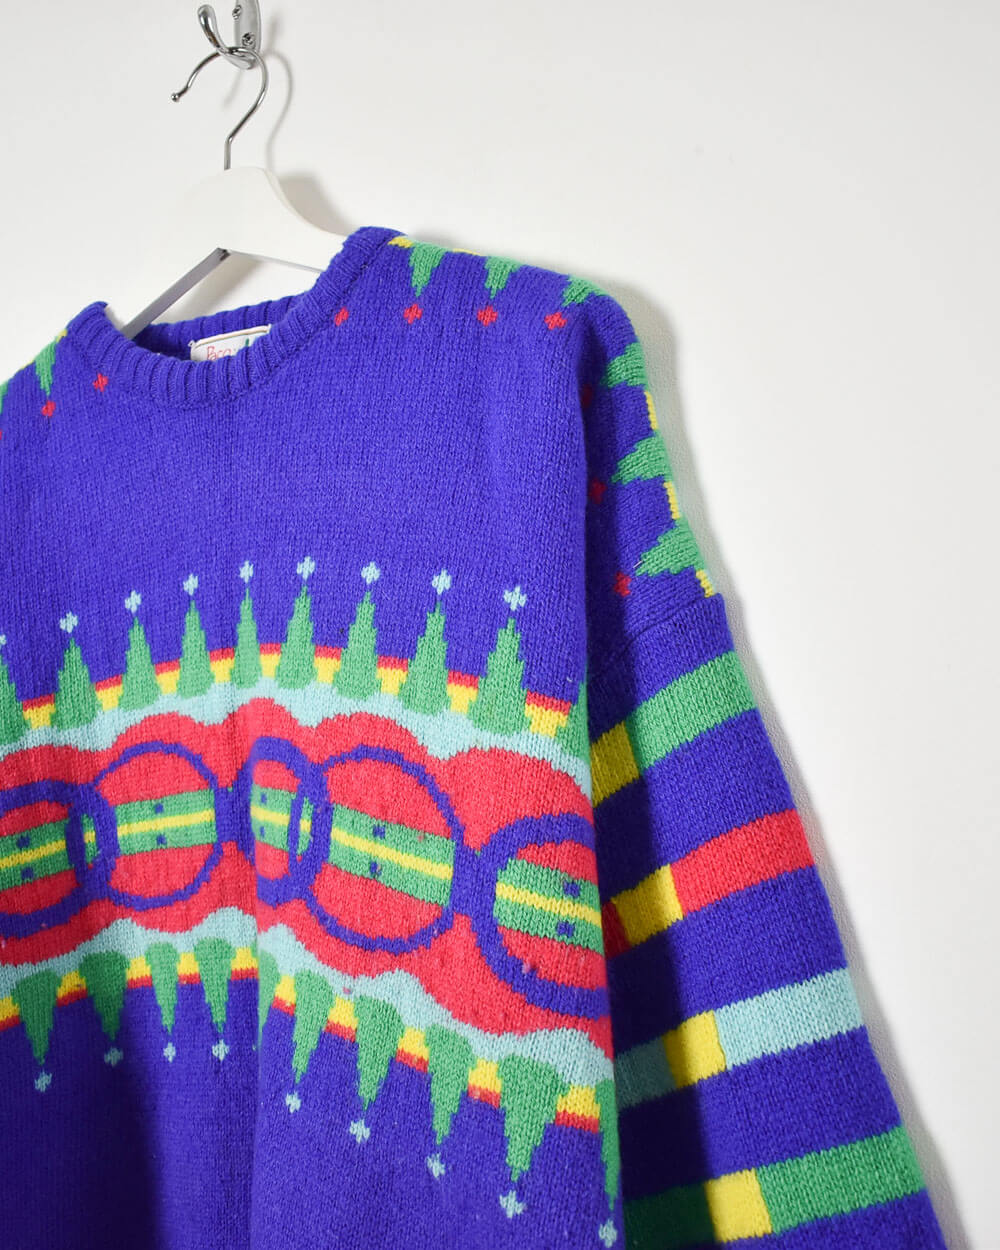 Paco Knitted Sweatshirt - Medium - Domno Vintage 90s, 80s, 00s Retro and Vintage Clothing 